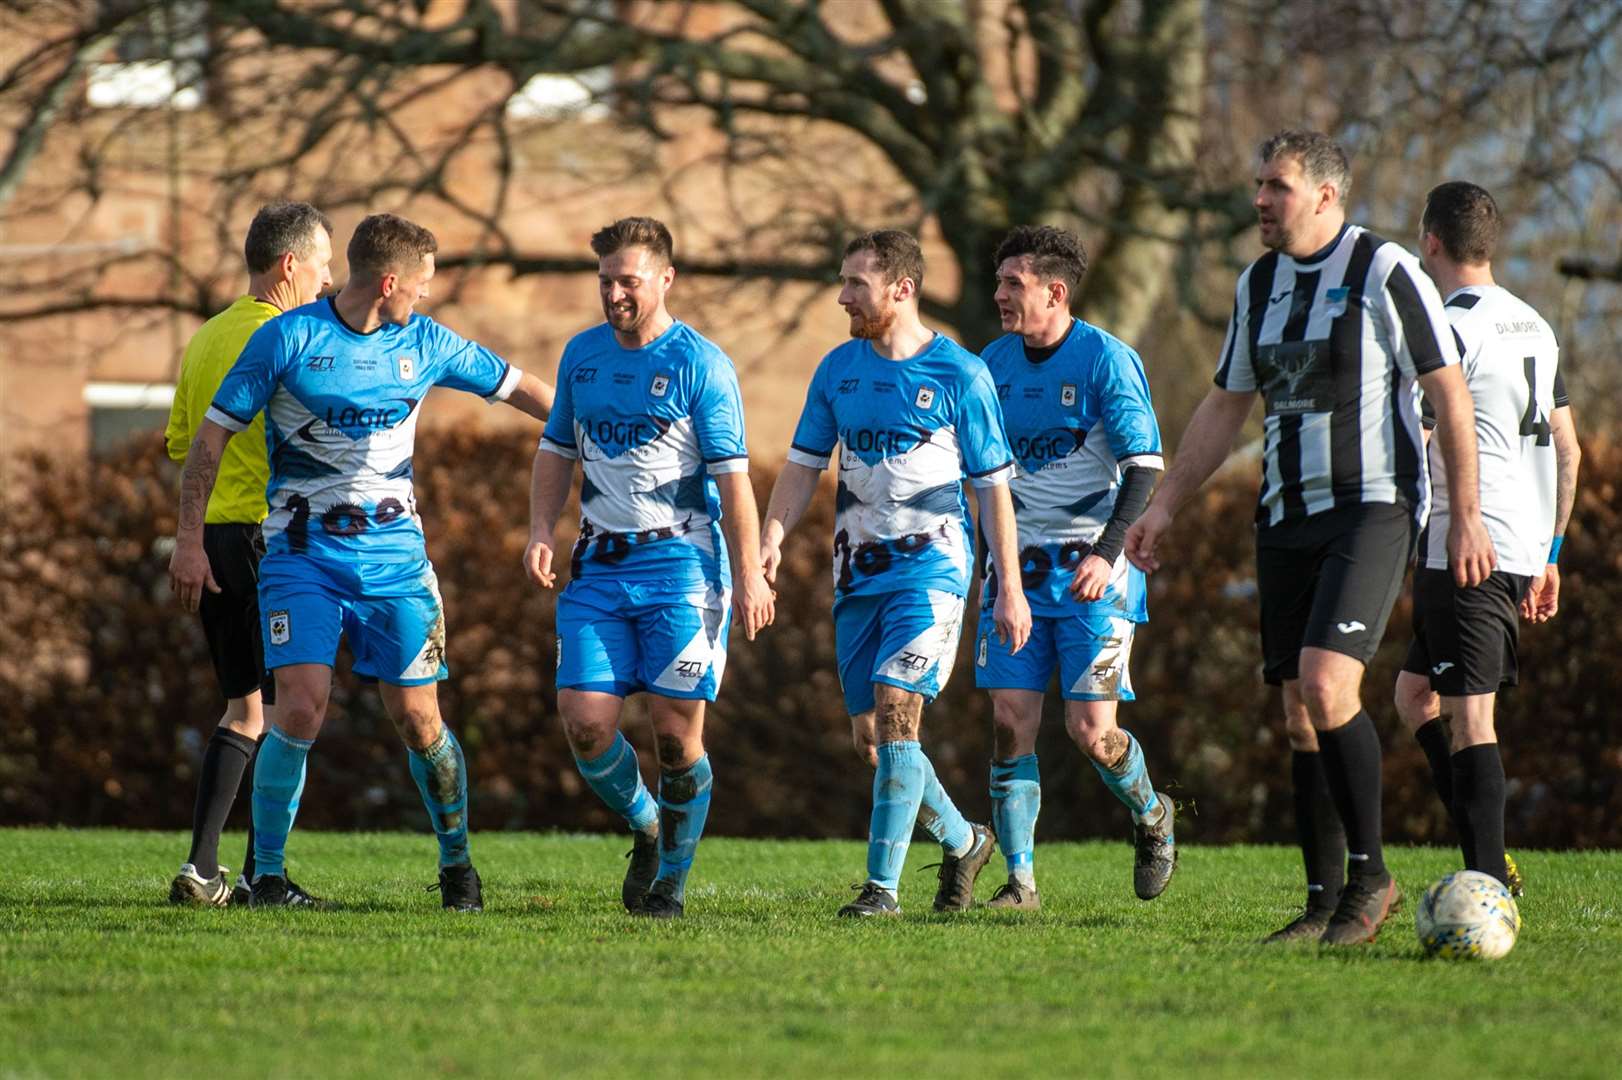 Loch Ness players celebrate Ryan Ingram's goal in the leaders' 3-2 win against Alness United.